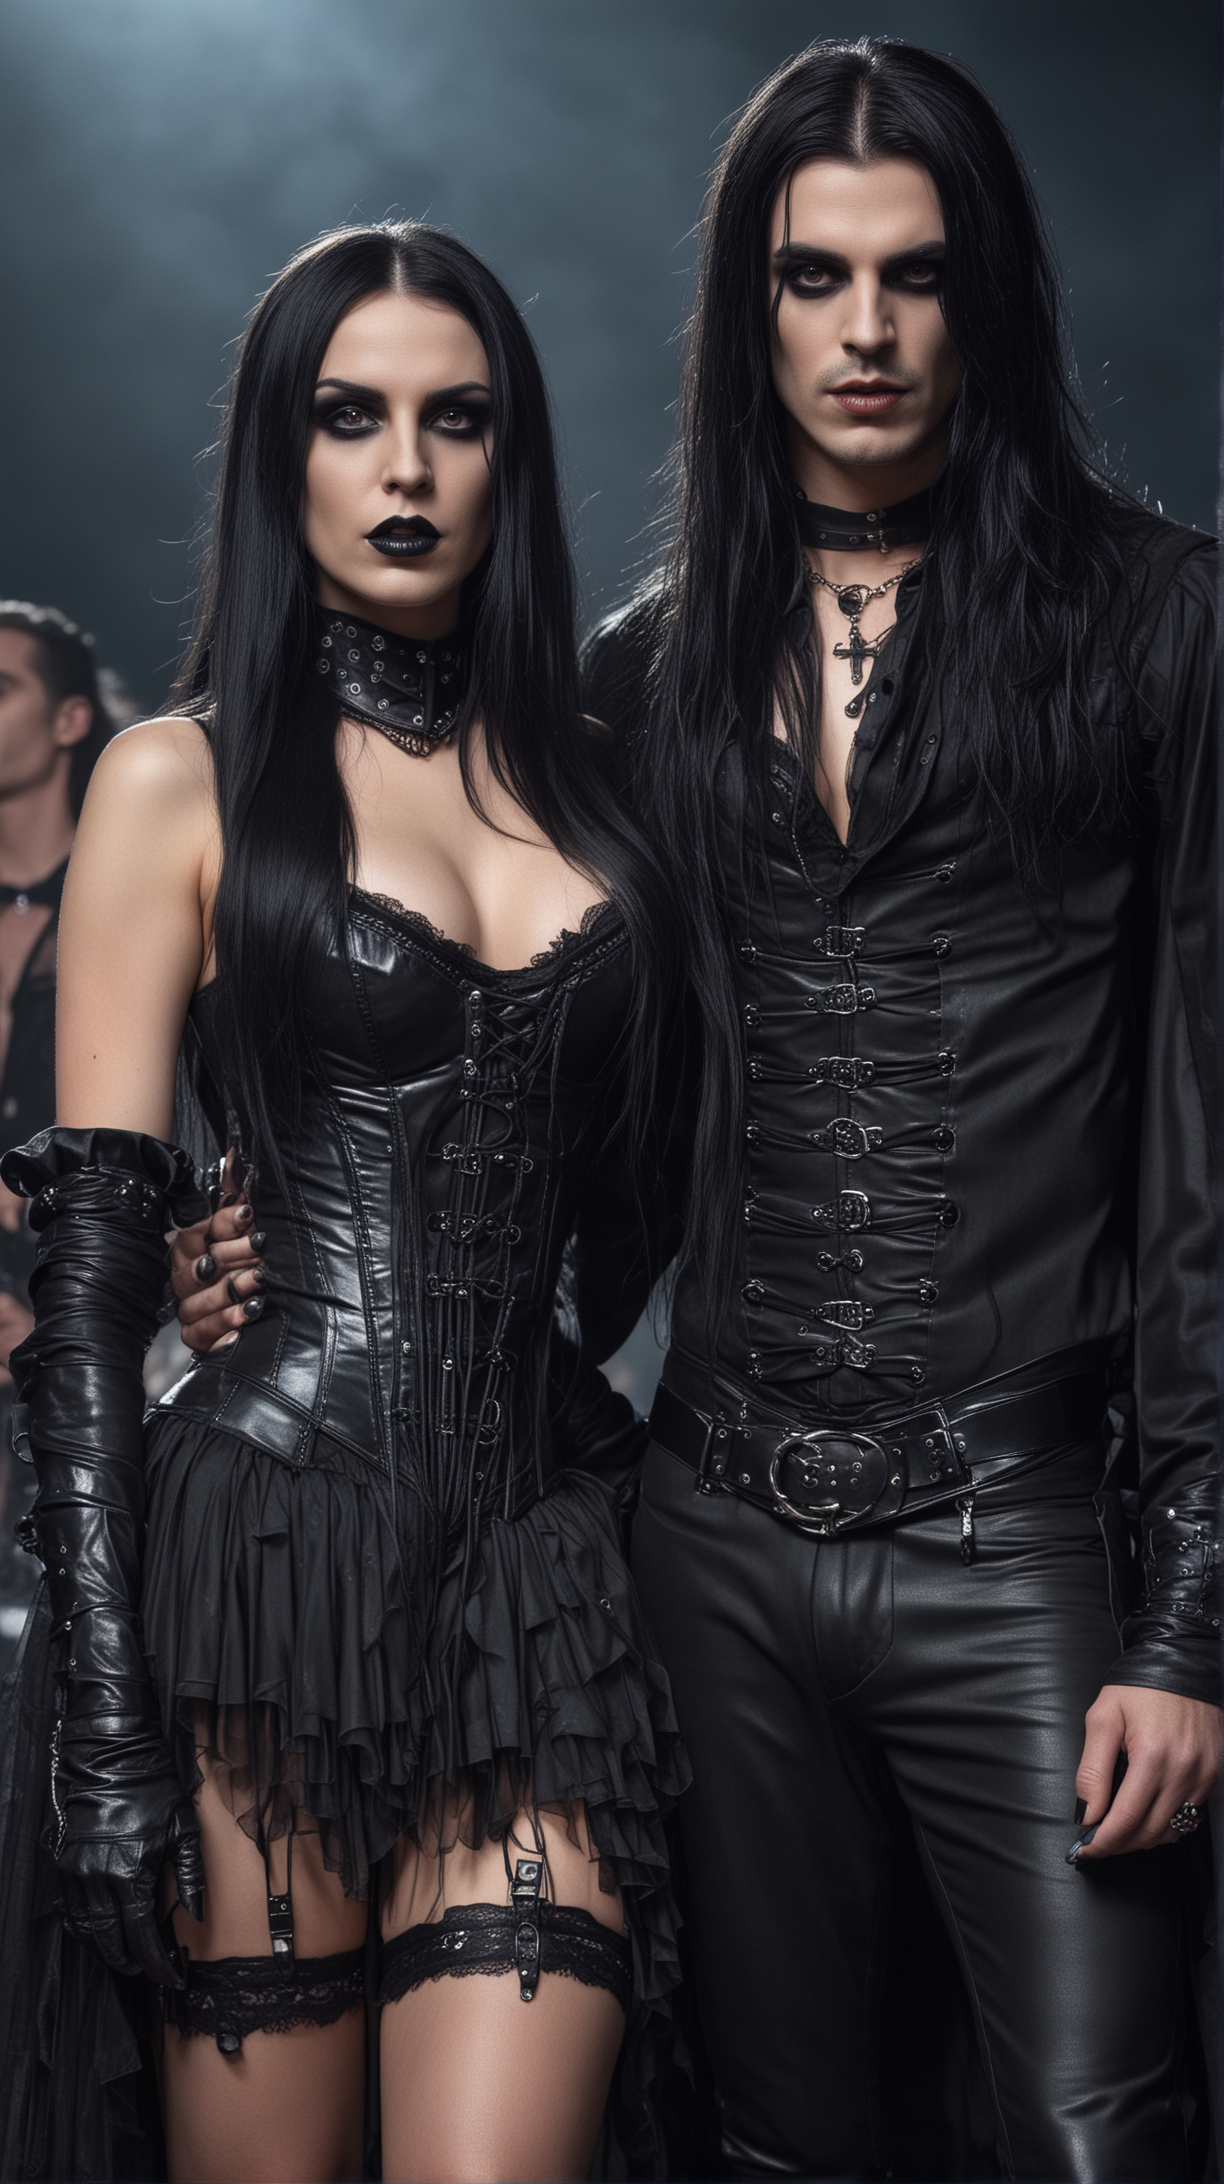 Gothic Couple with Long Black Hair and Latex Corsets at Night Rock Festival